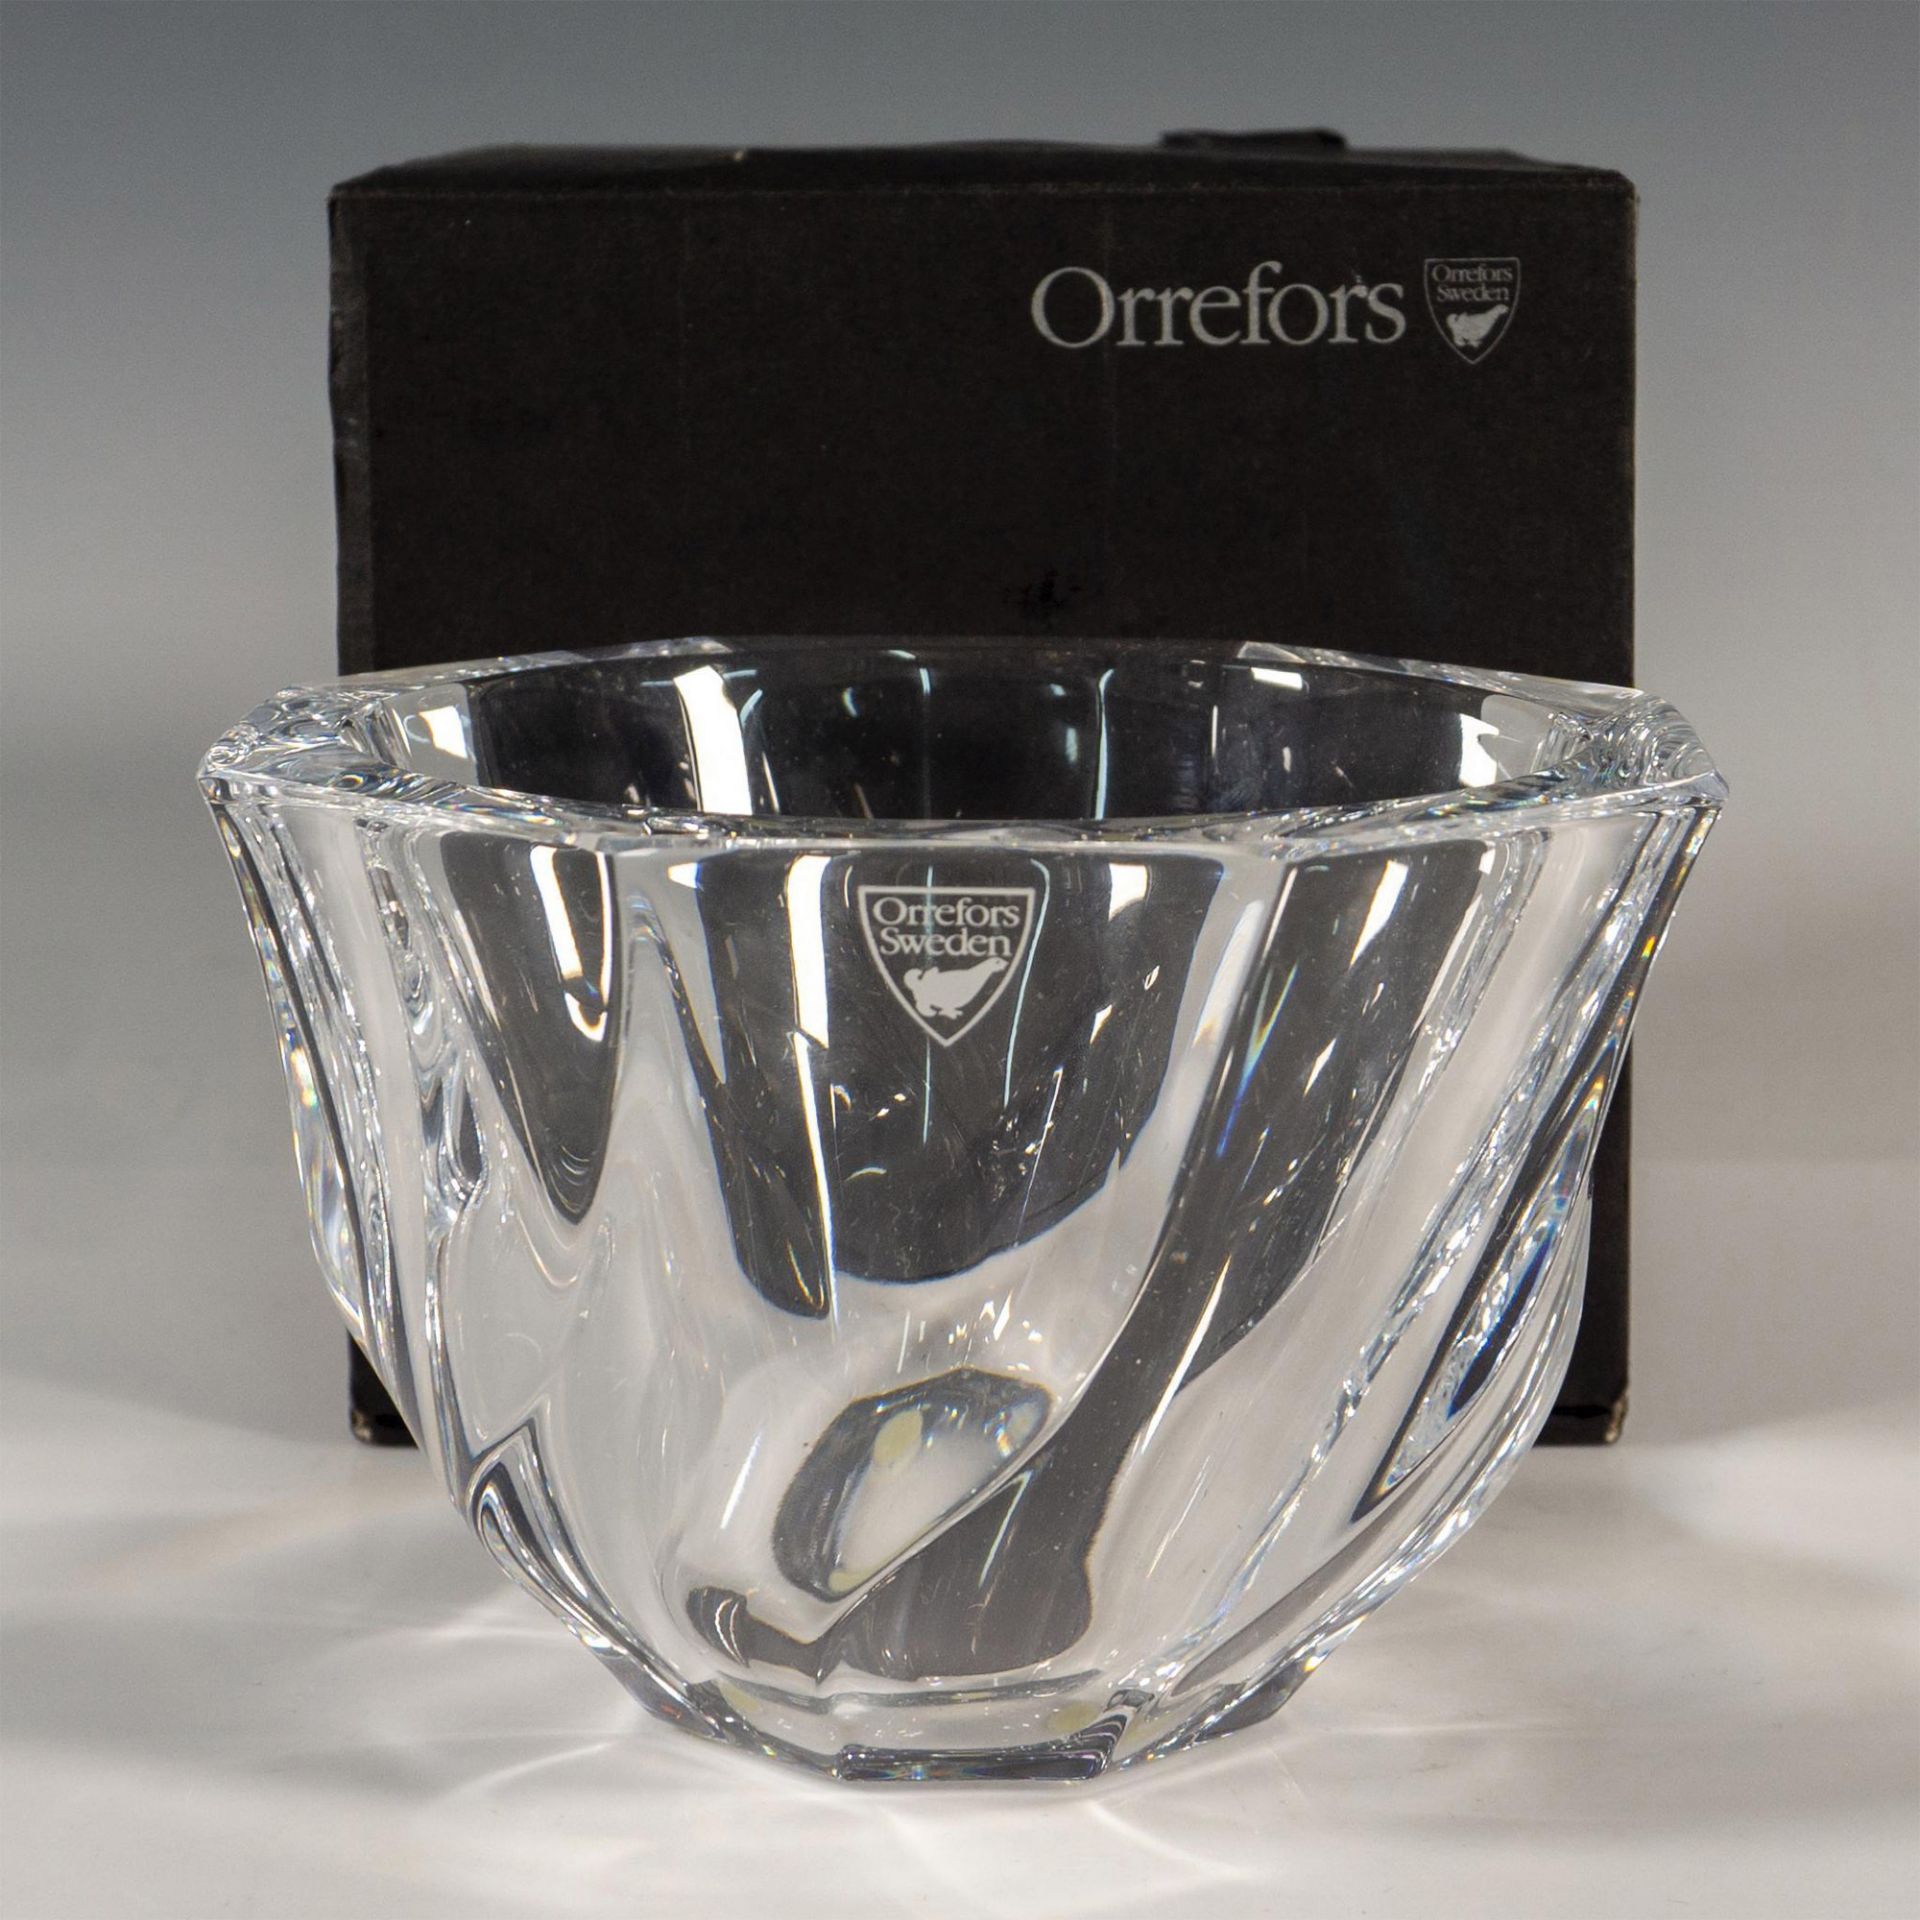 Orrefors by Olle Alberius Crystal Bowl, Residence - Image 2 of 4